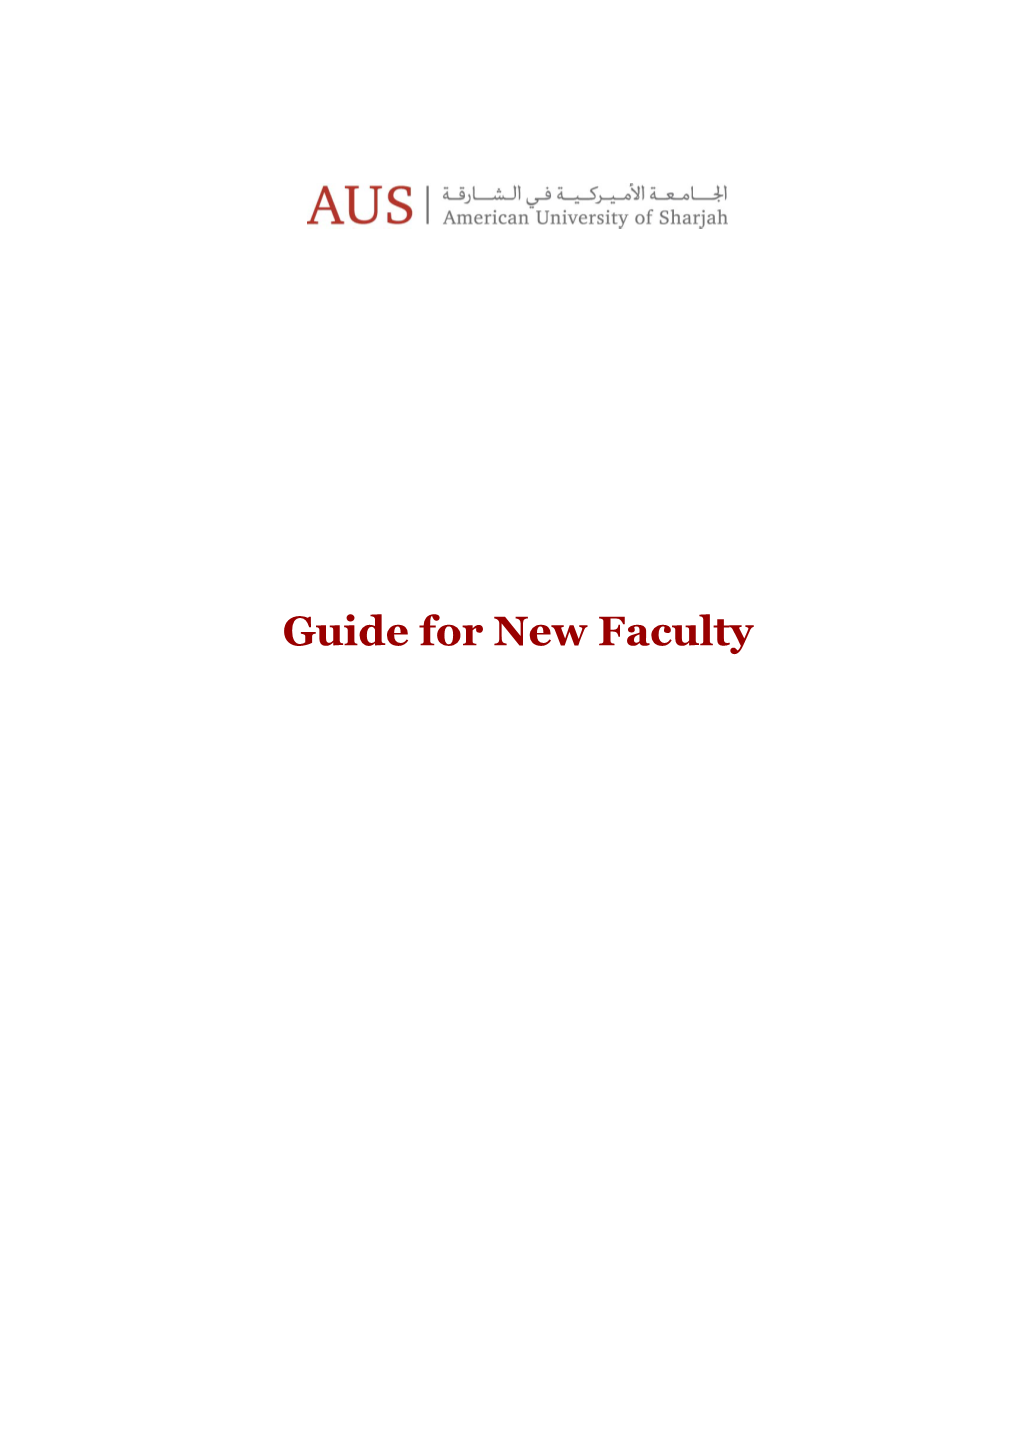 Guide for New Faculty Contents